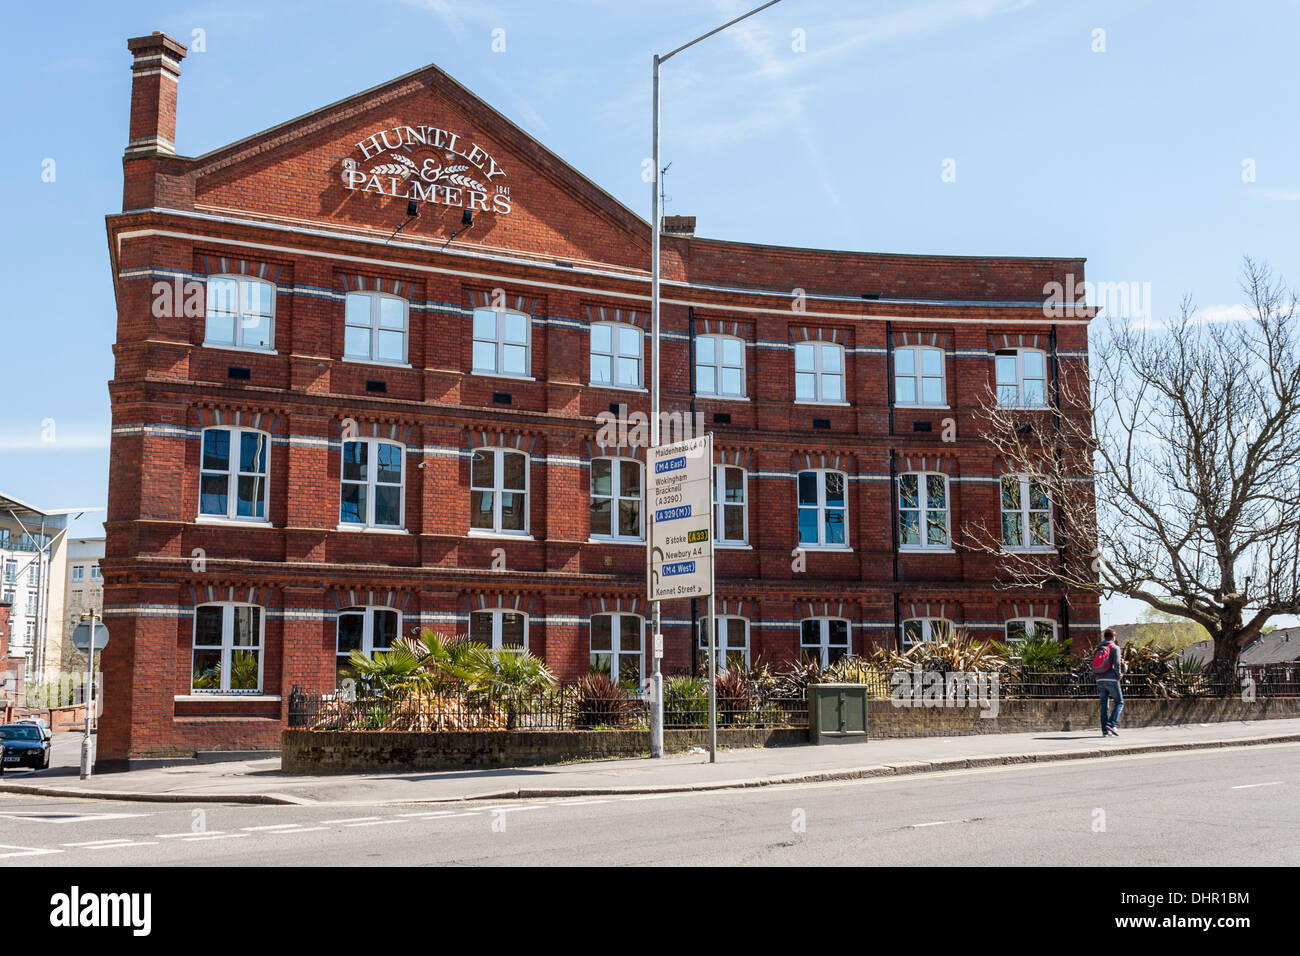 The Huntley and Palmer building, Reading, Berkshire, England, GB, UK Stock Photo